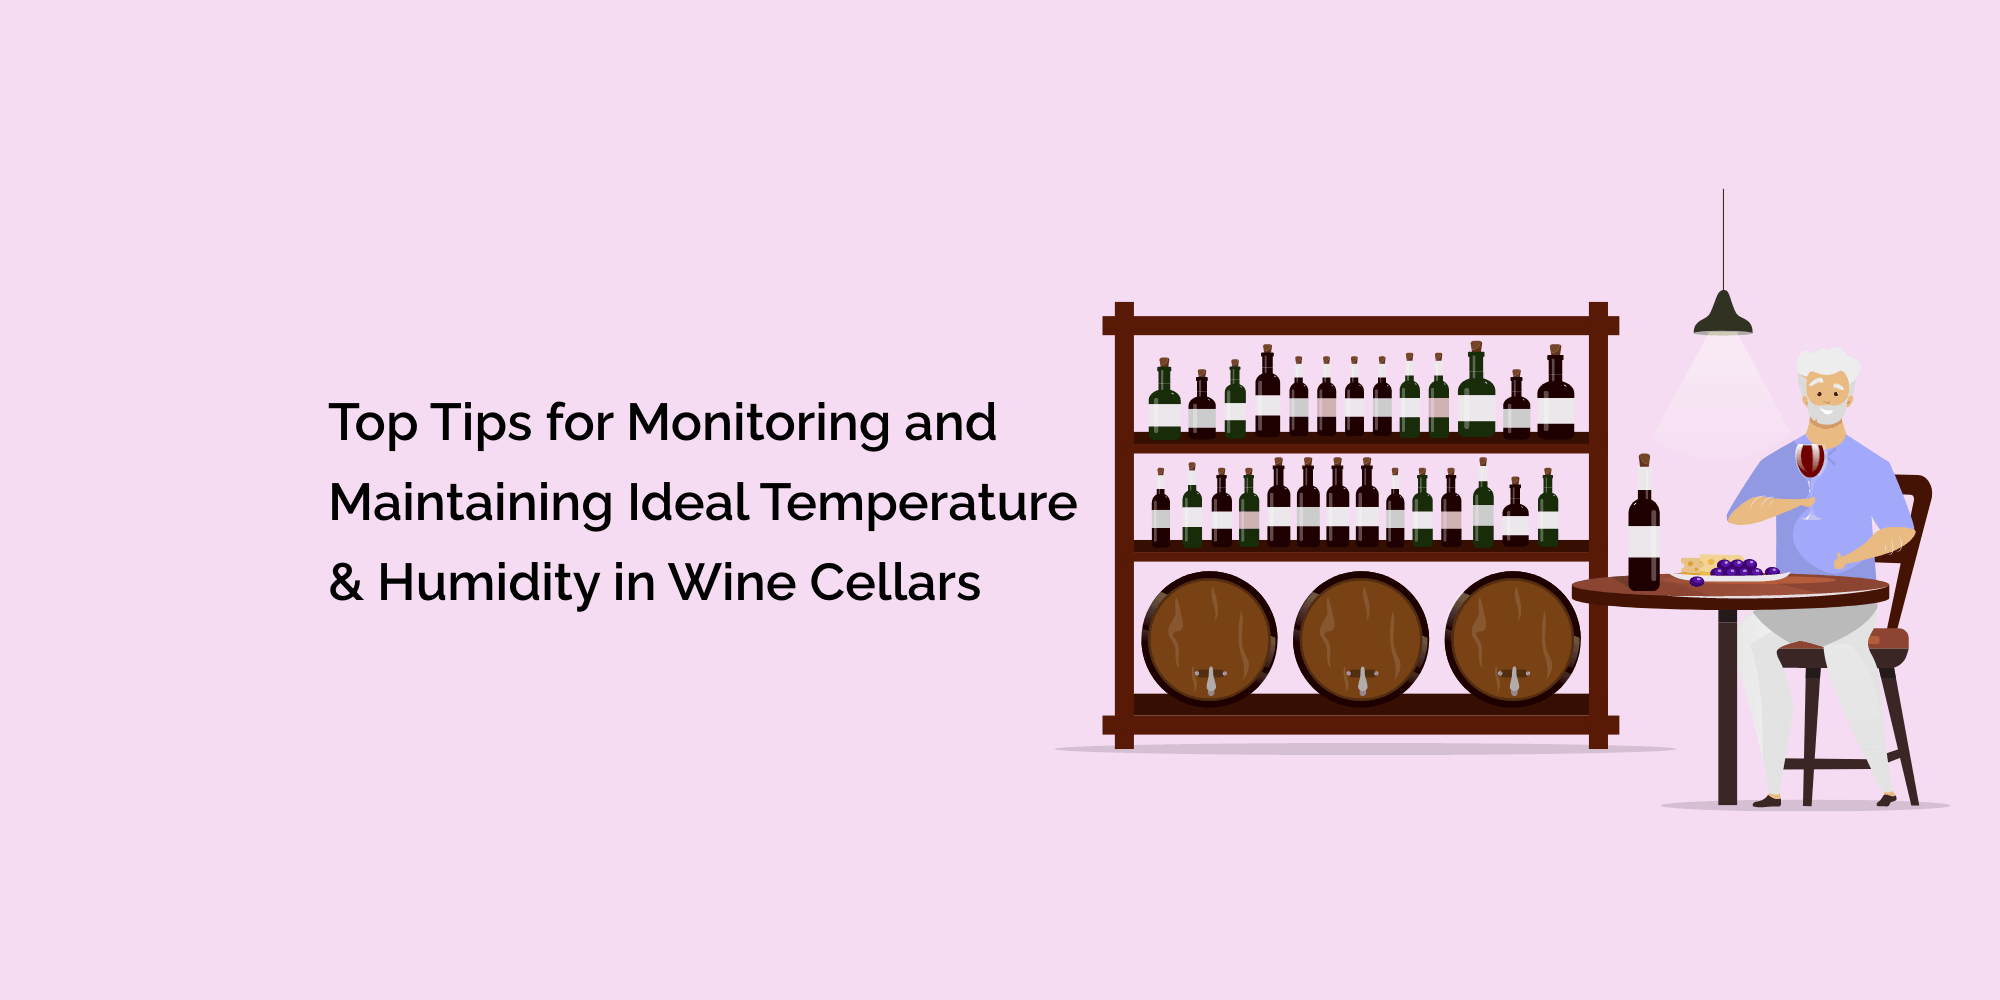 Top Tips for Monitoring and Maintaining Ideal Temperature and Humidity in Wine Cellars